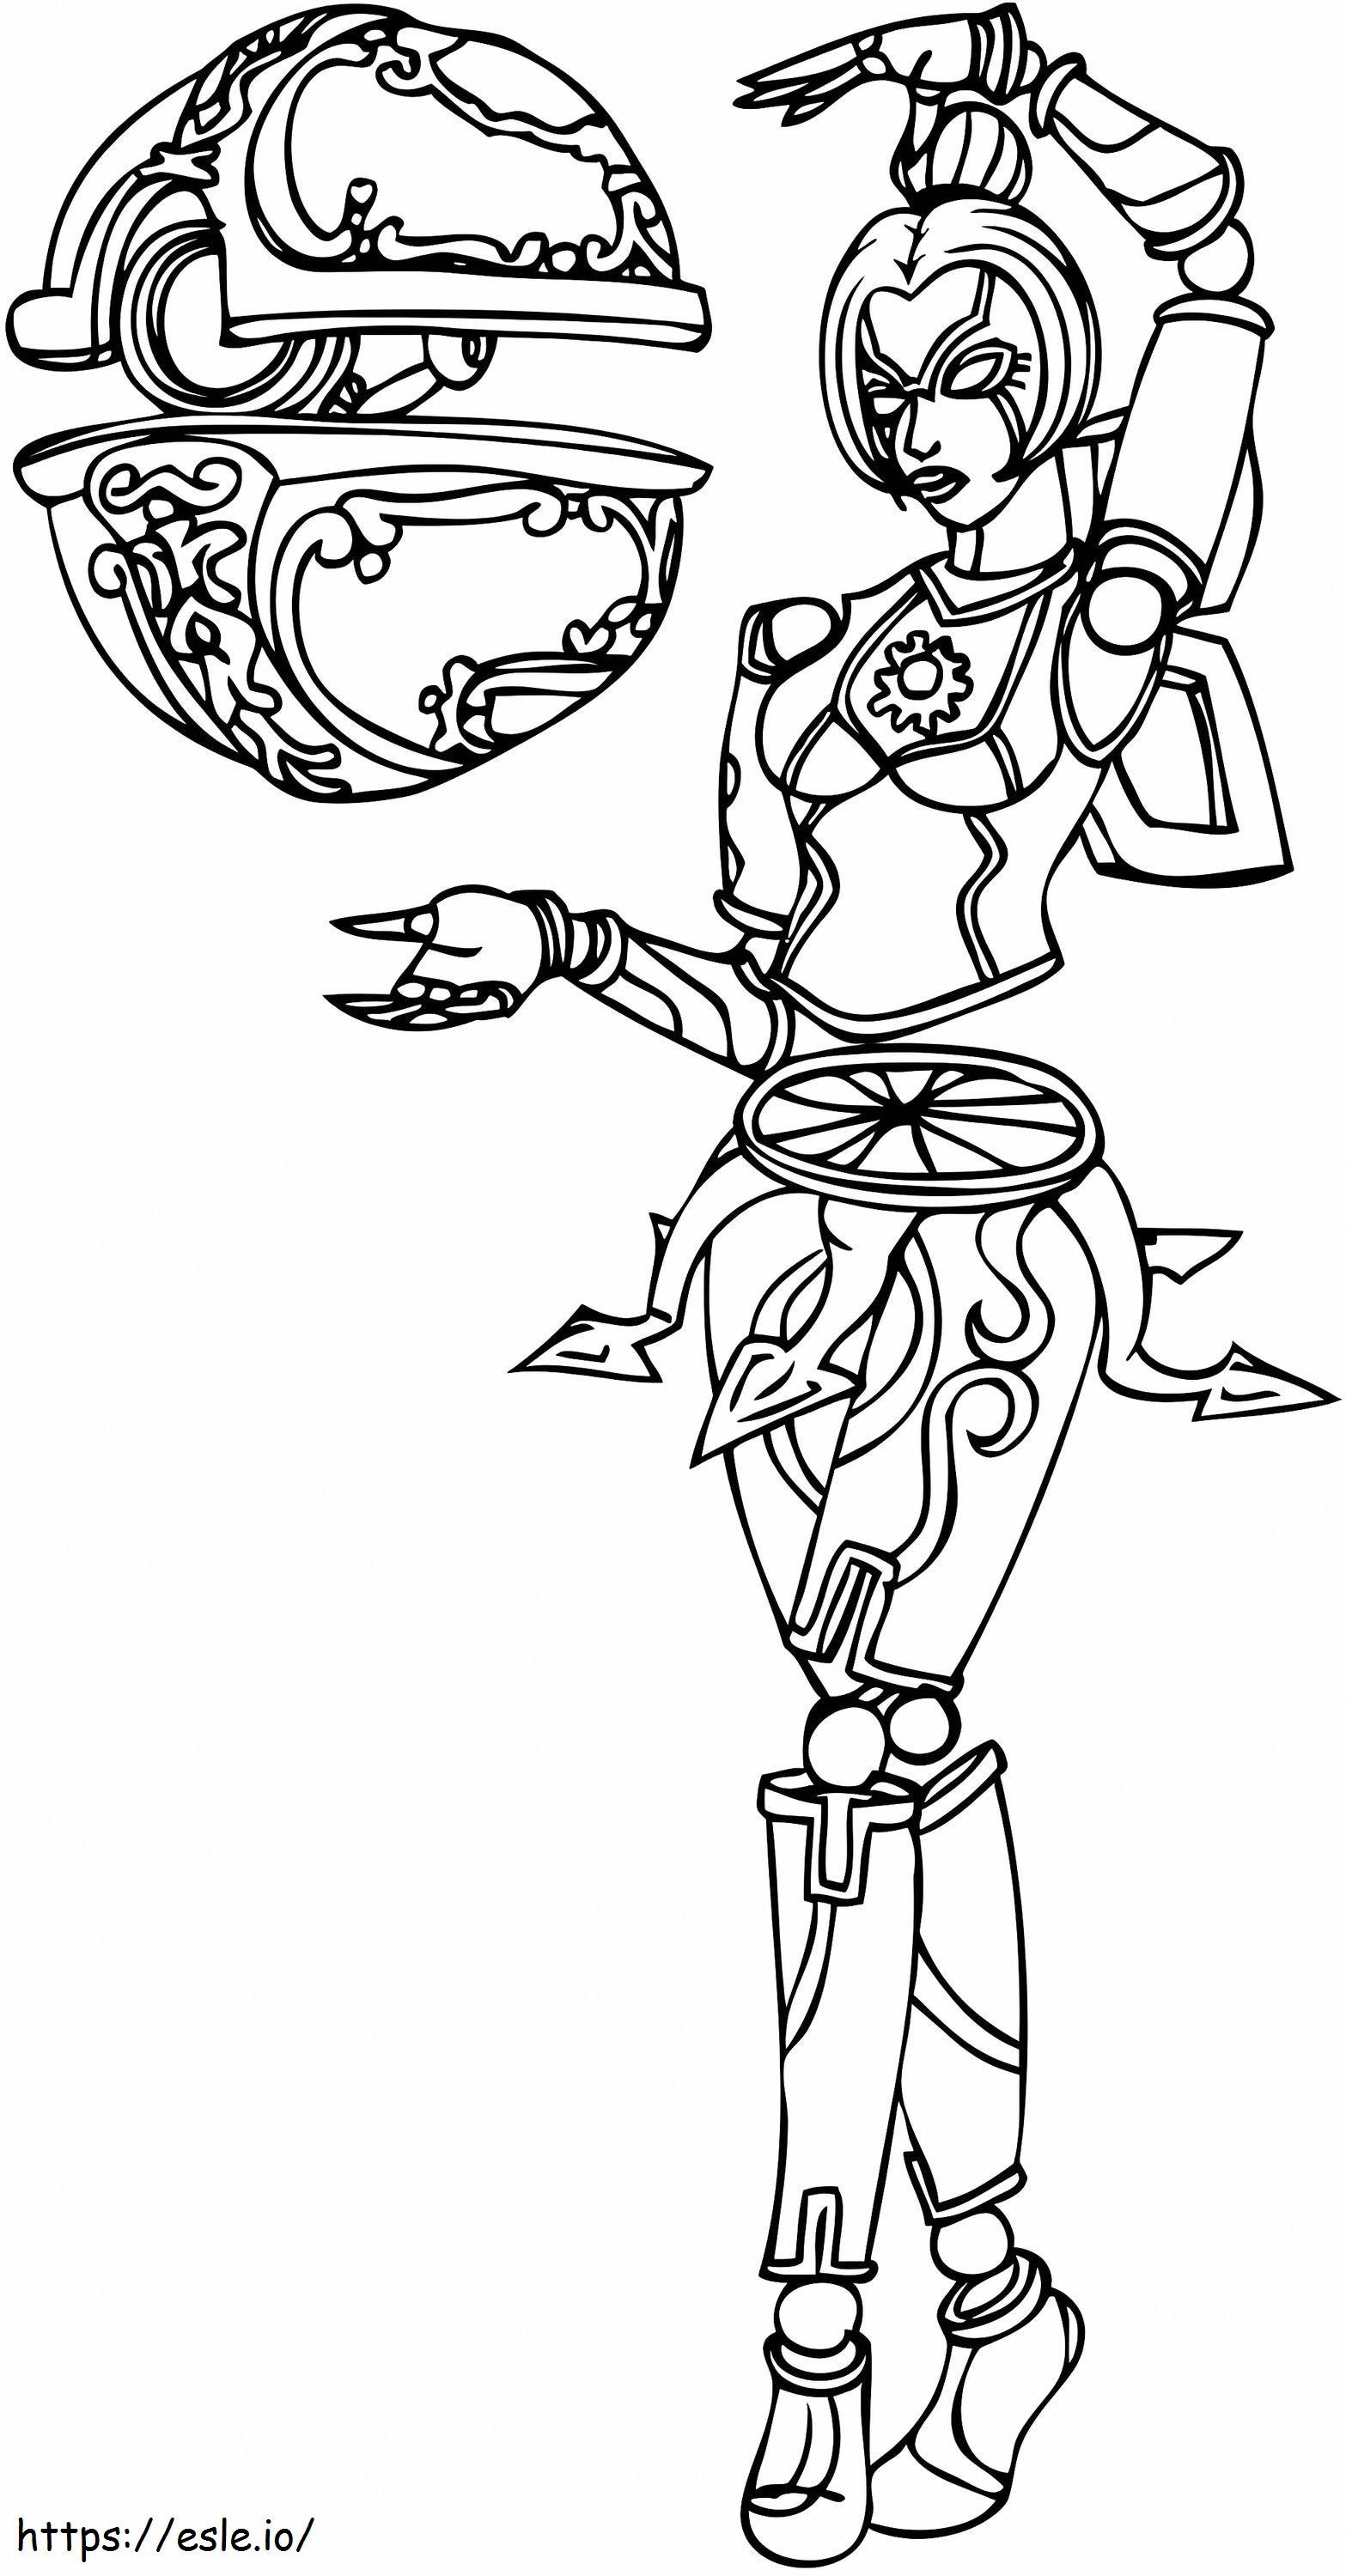 1561533271 Oriana A4 coloring page